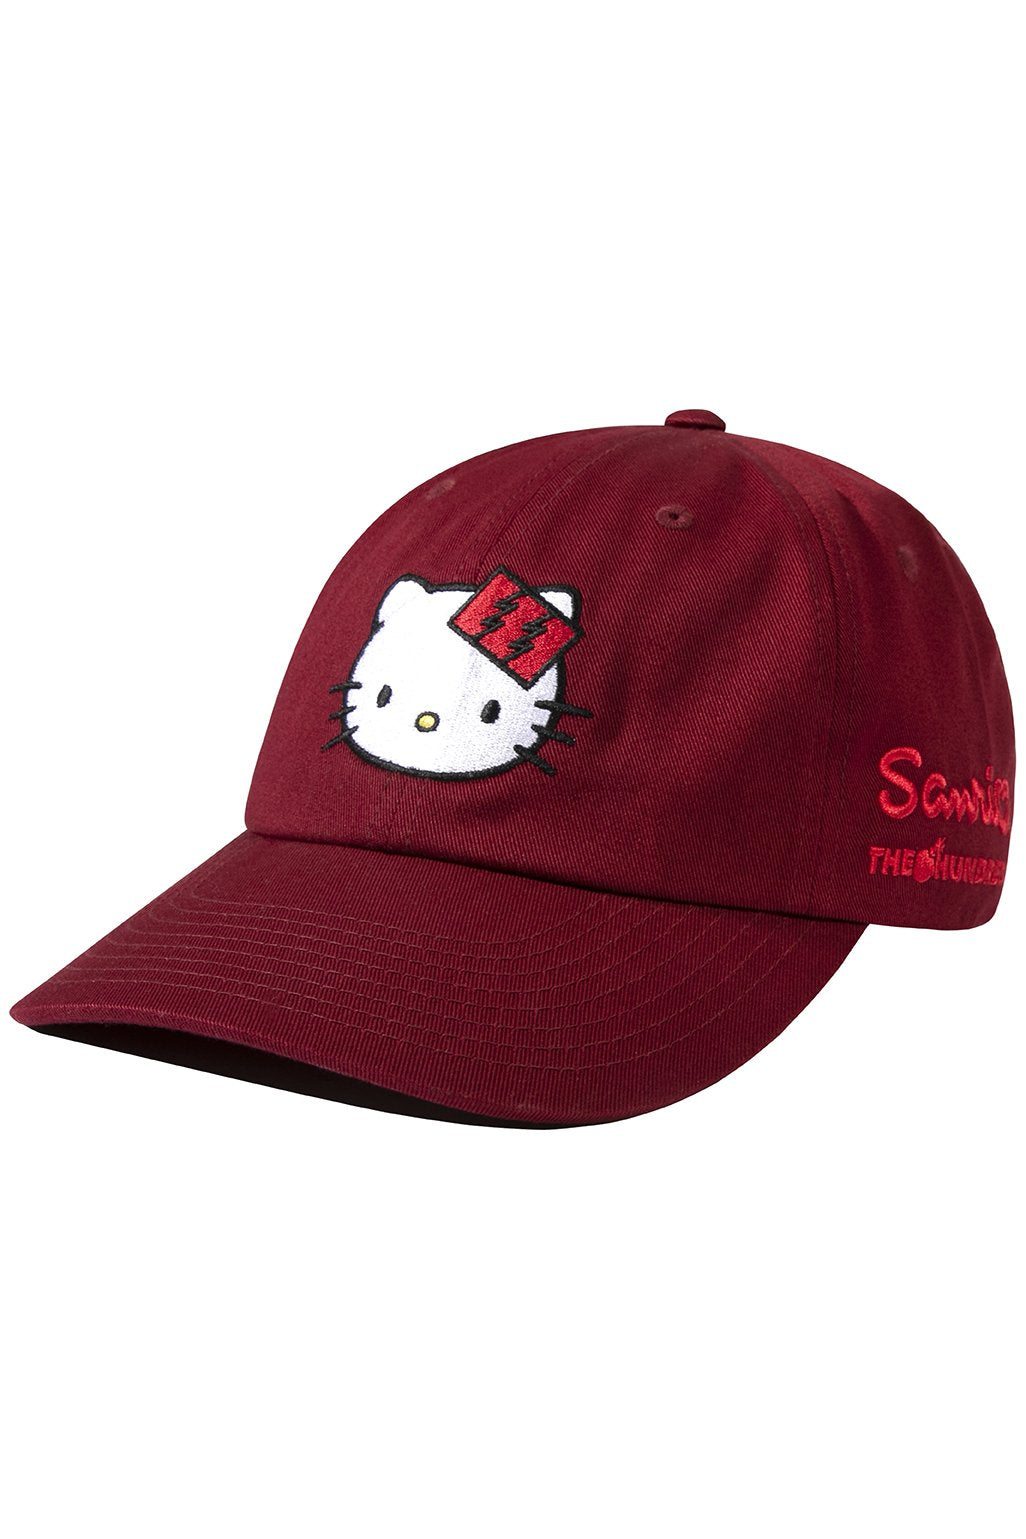 The Hundreds x Sanrio Hello Kitty Dad Hat in Burgundy